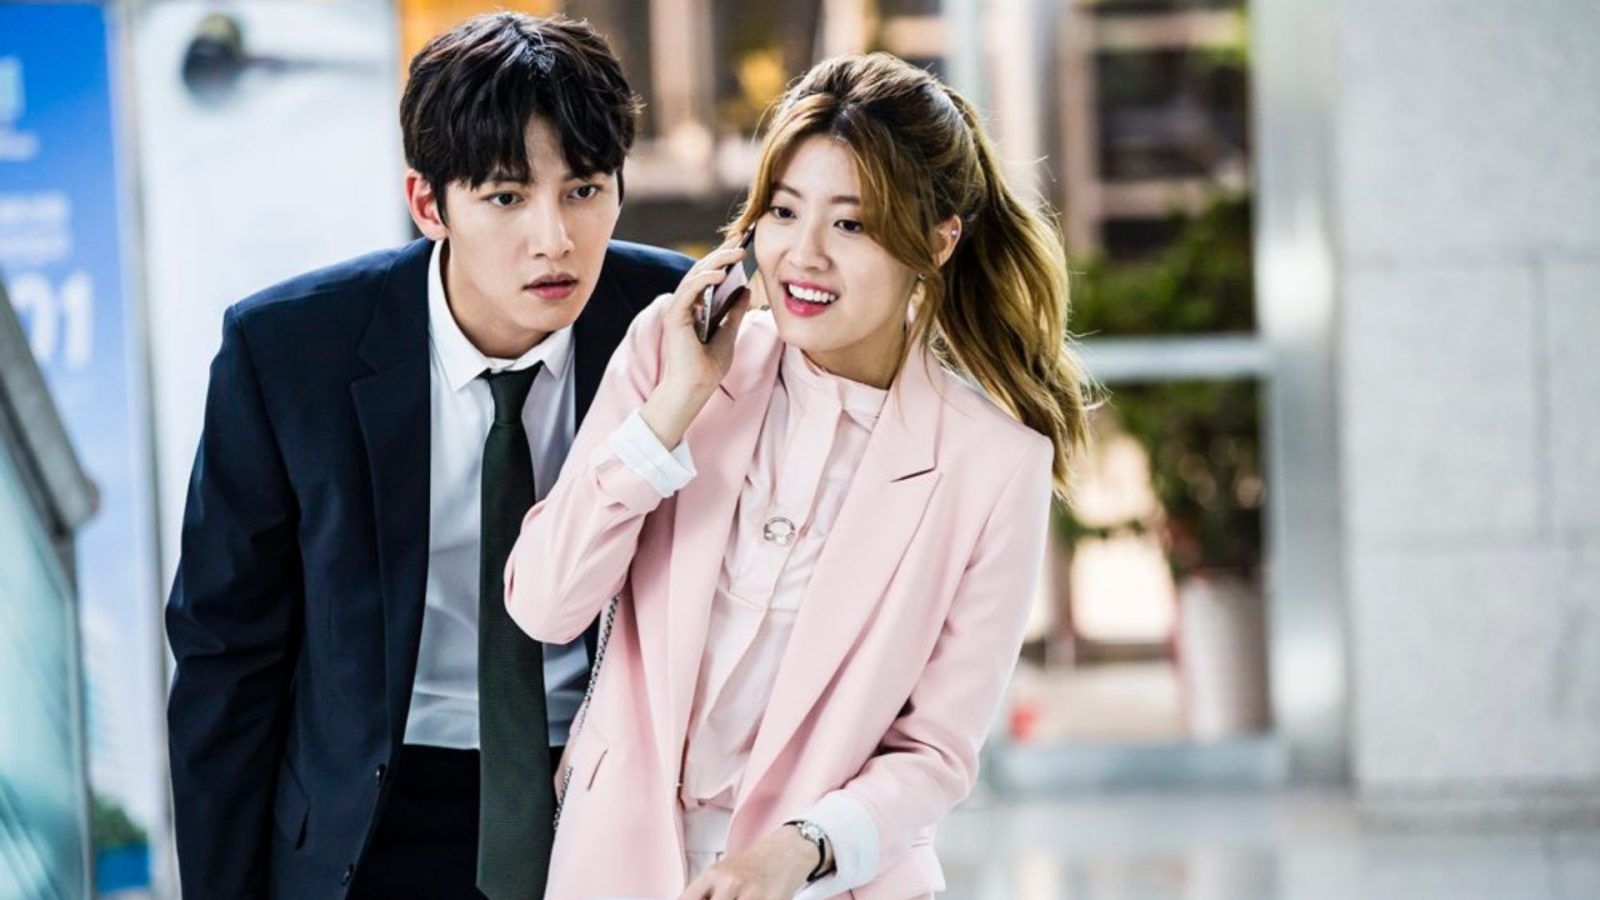 Popular romantic Kdramas on Netflix that have a happy ending